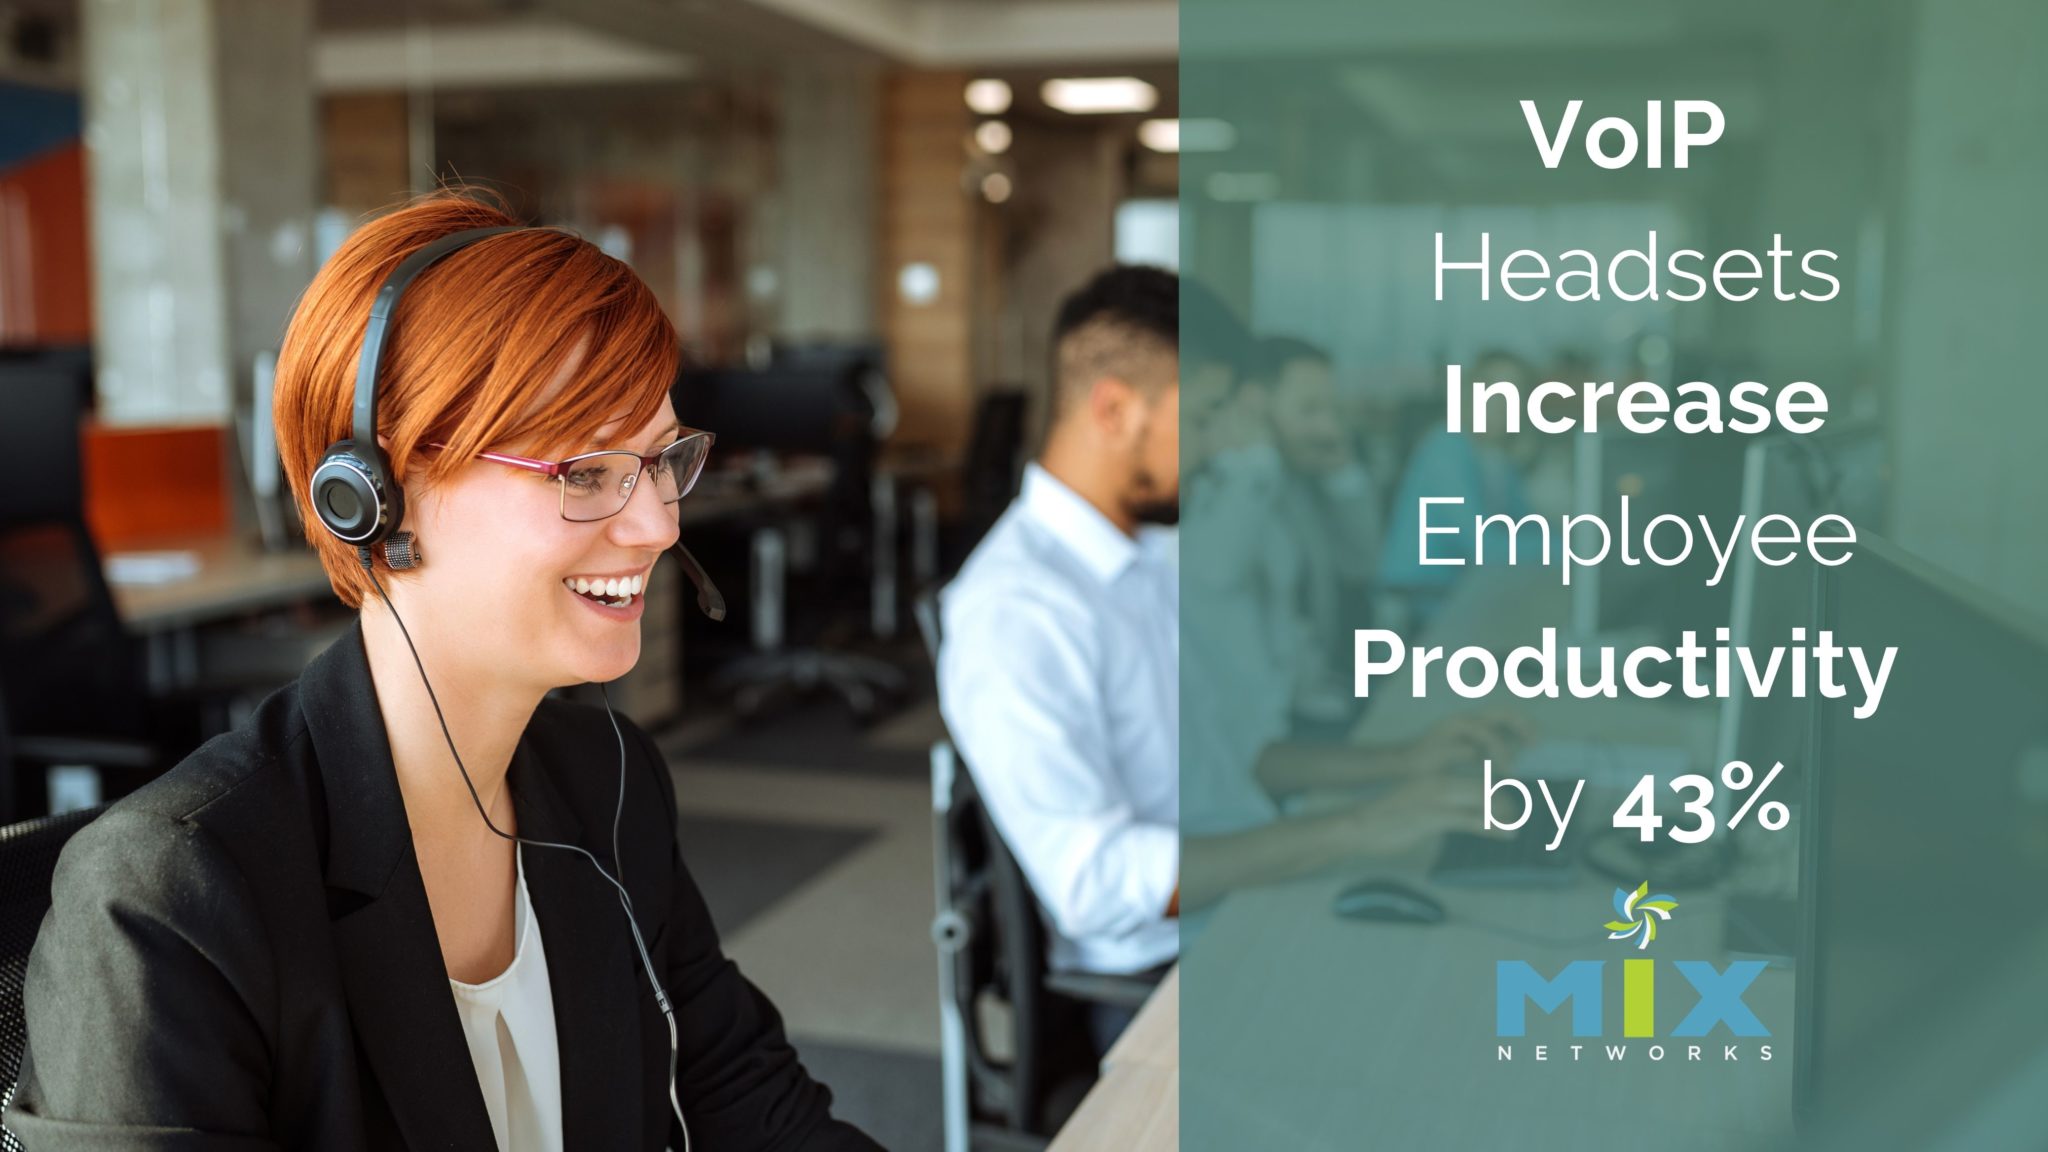 Hands-Free Headsets Increase Employee Productivity